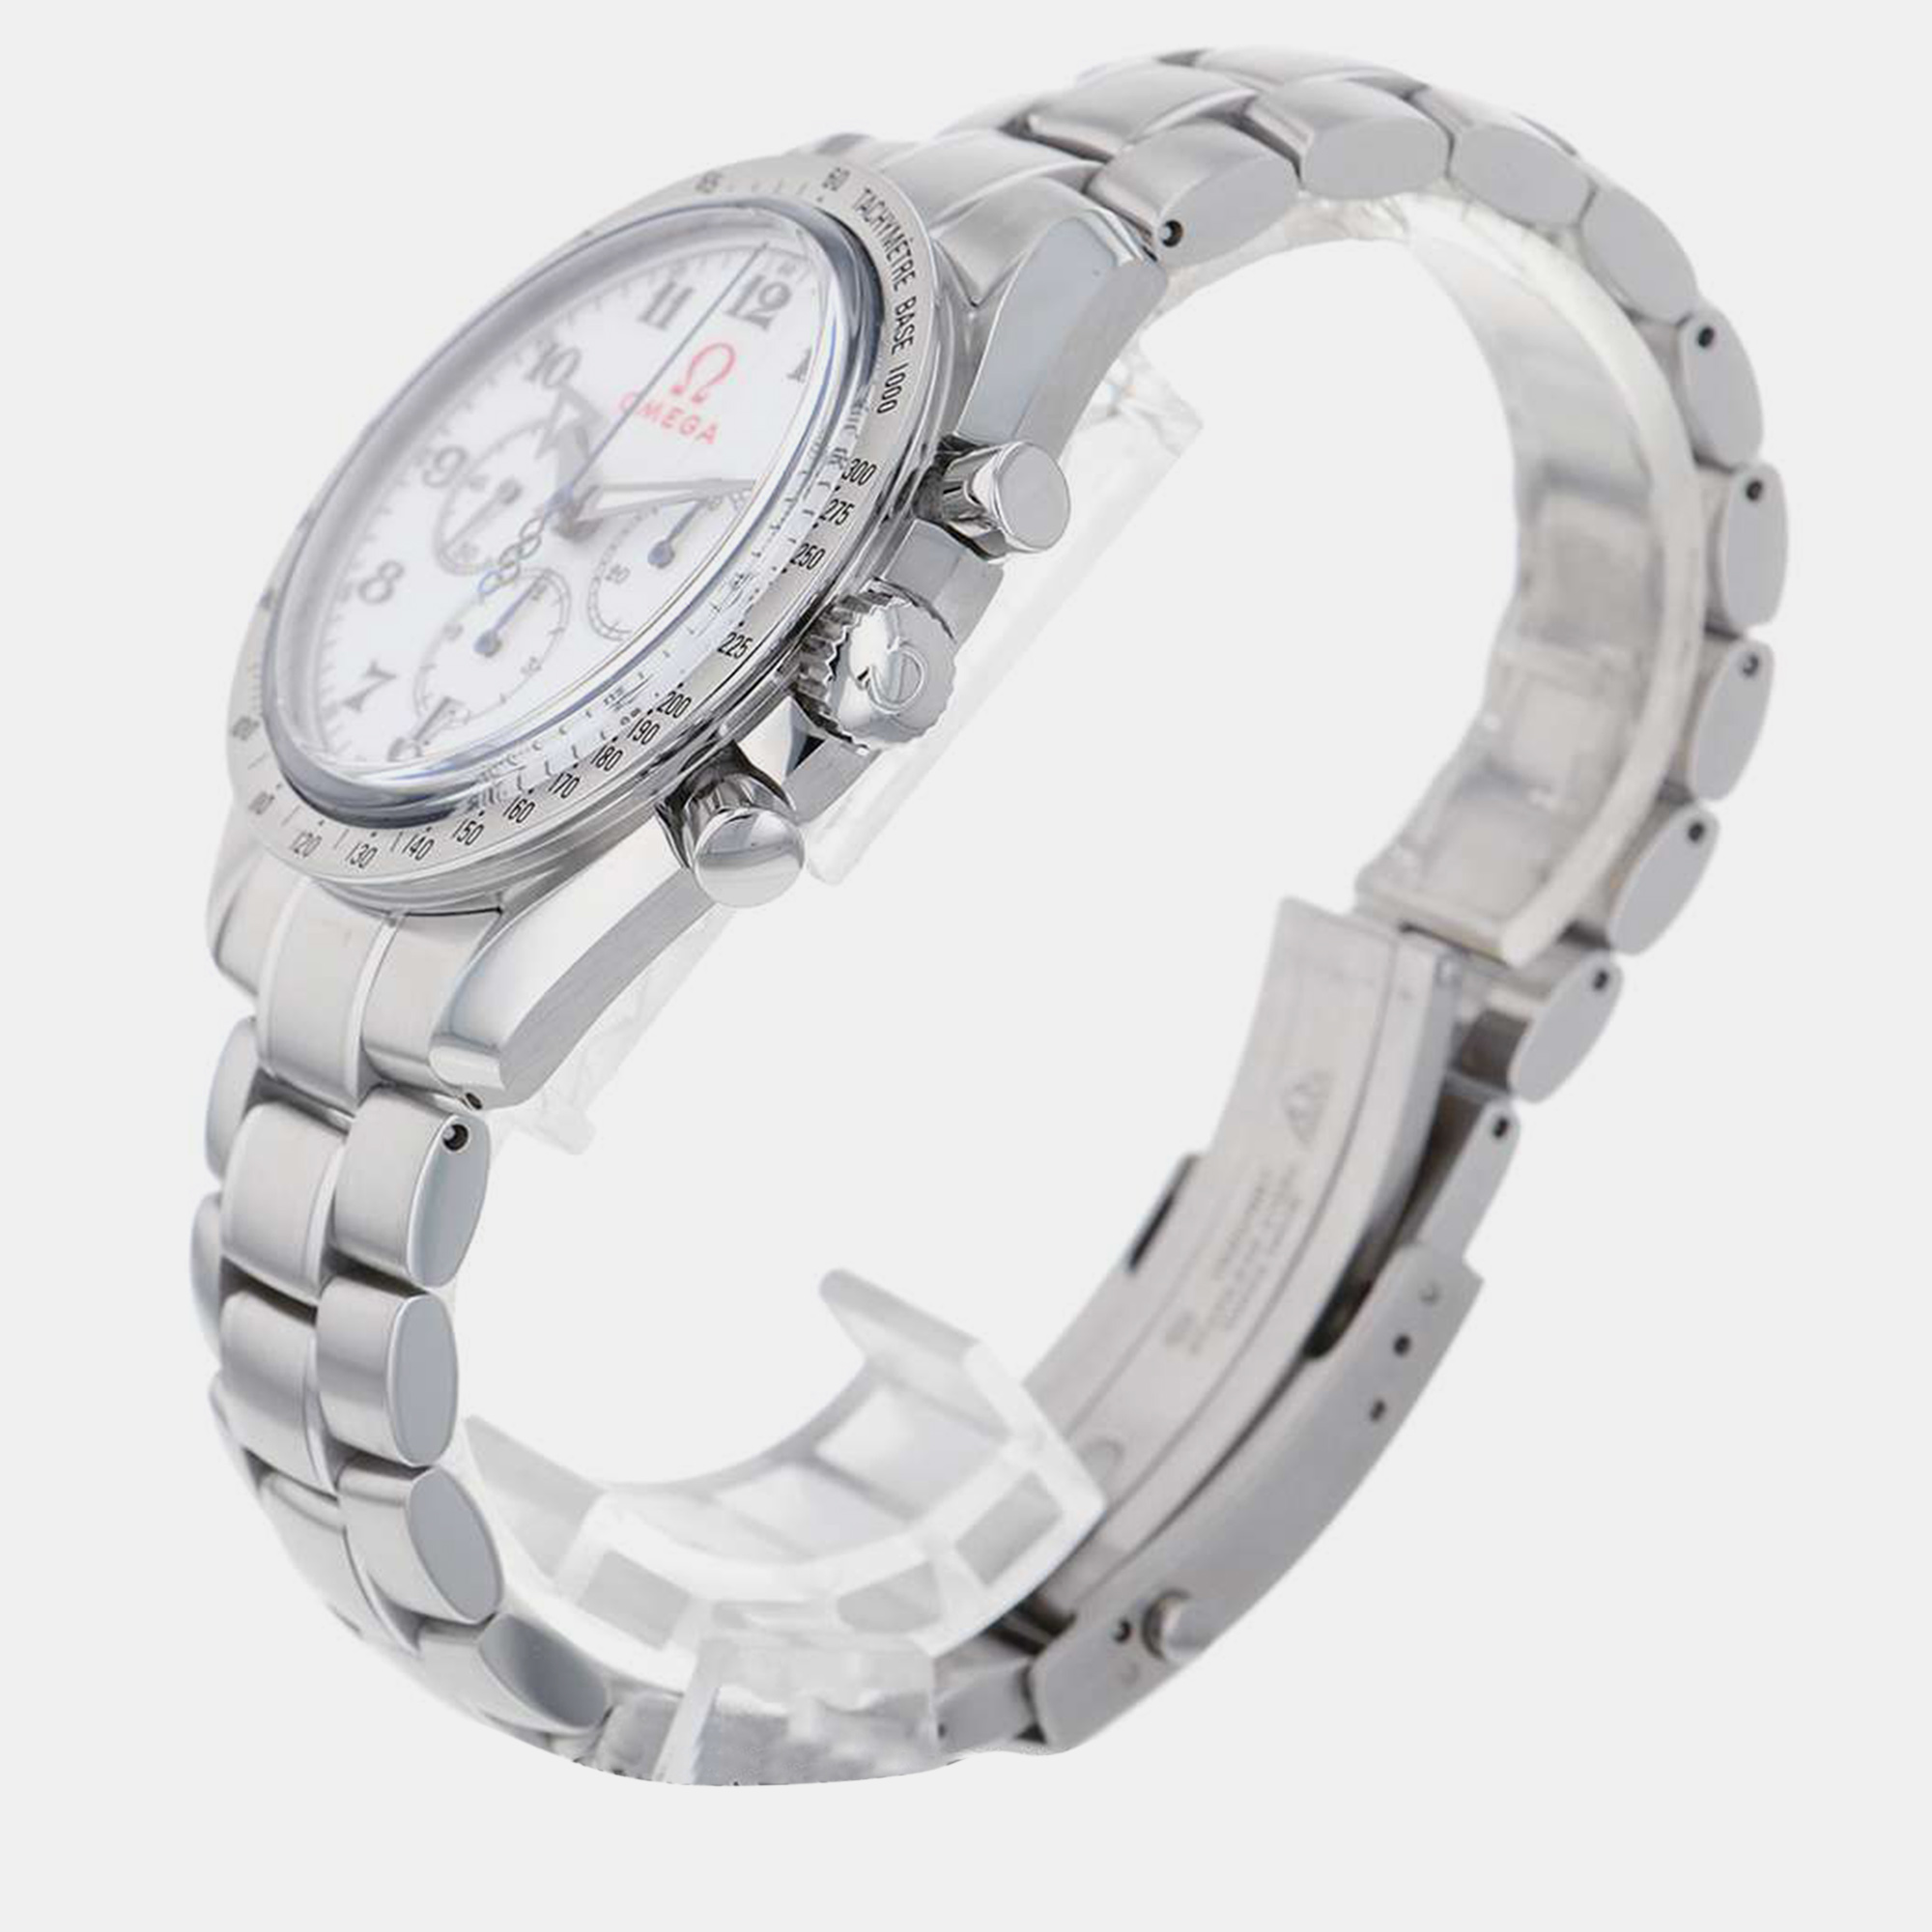 

Omega White Stainless Steel Speedmaster Broad Arrow 321.10.42.50.04.001 Automatic Chronograph Men's Wristwatch 42 mm